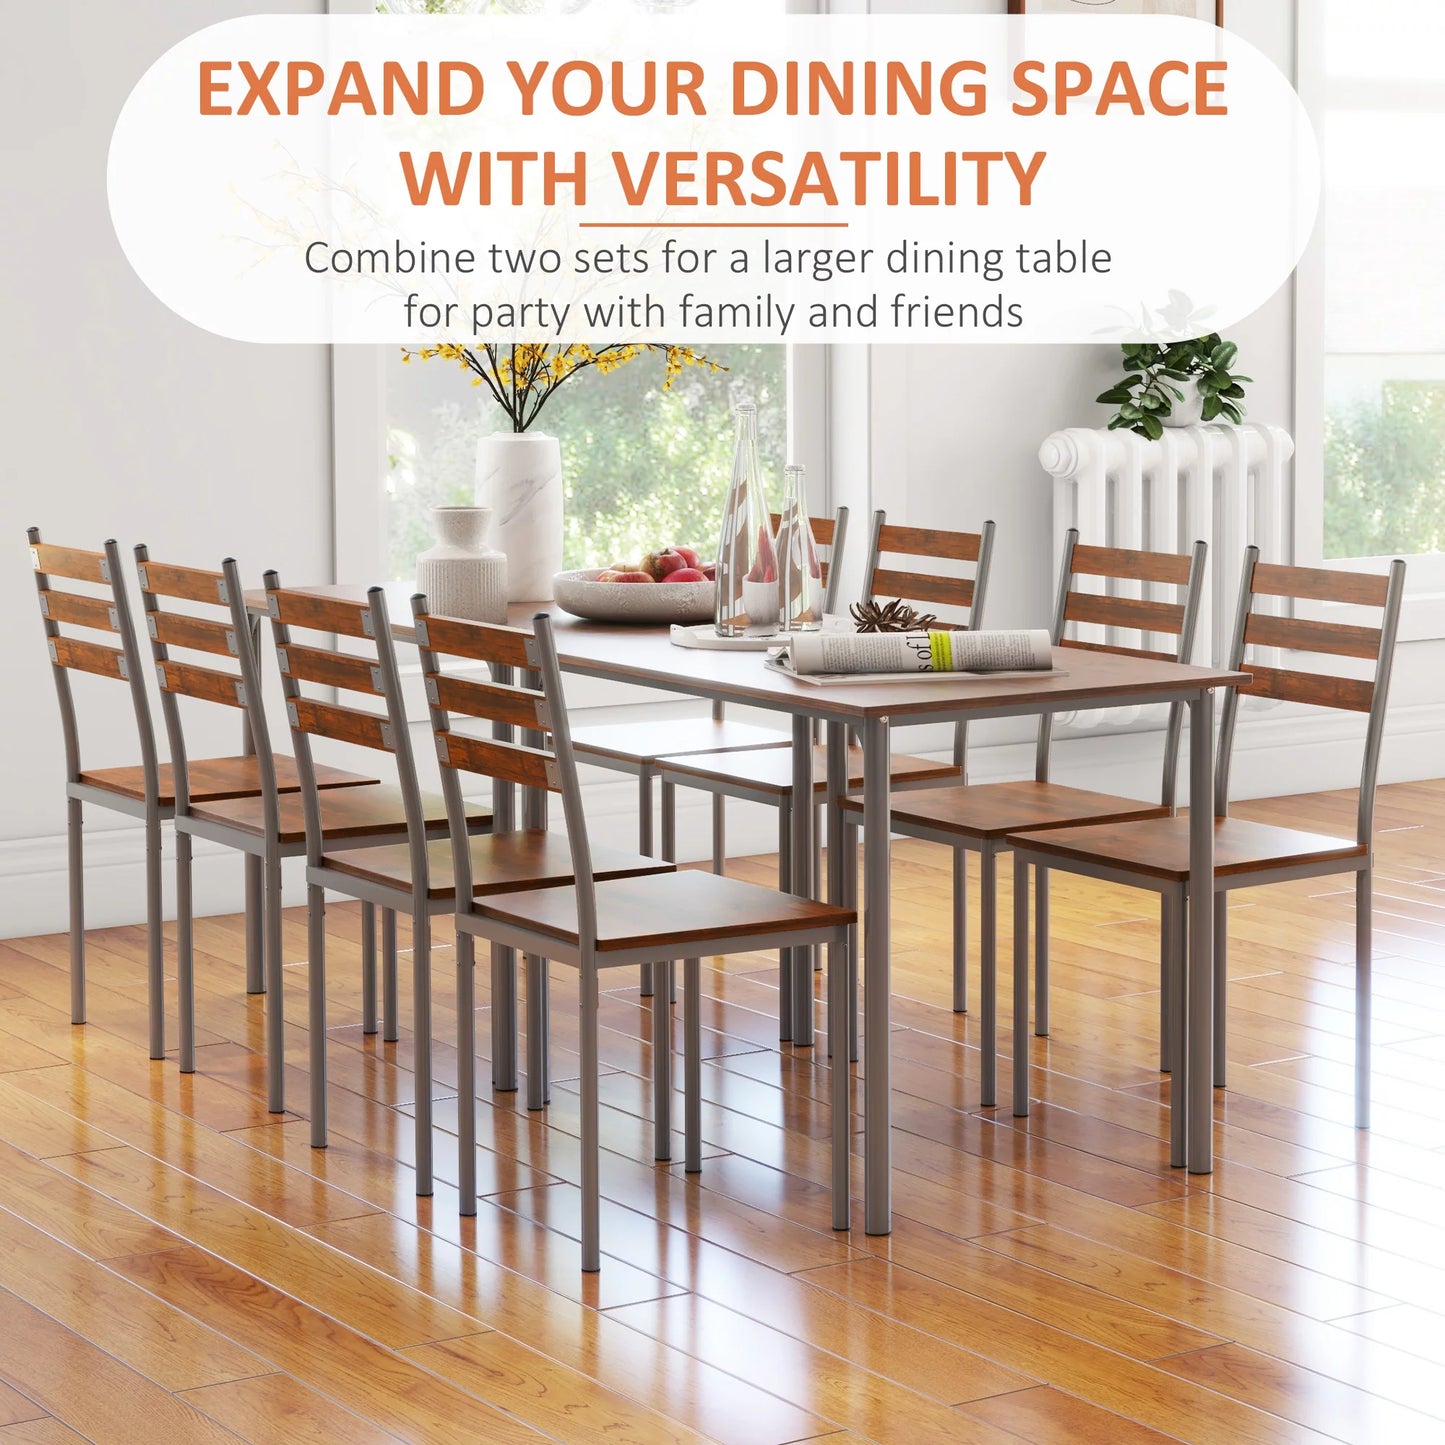 Contemporary Themed Eating Space with Four Seats for Family Dinners or Bbq'S